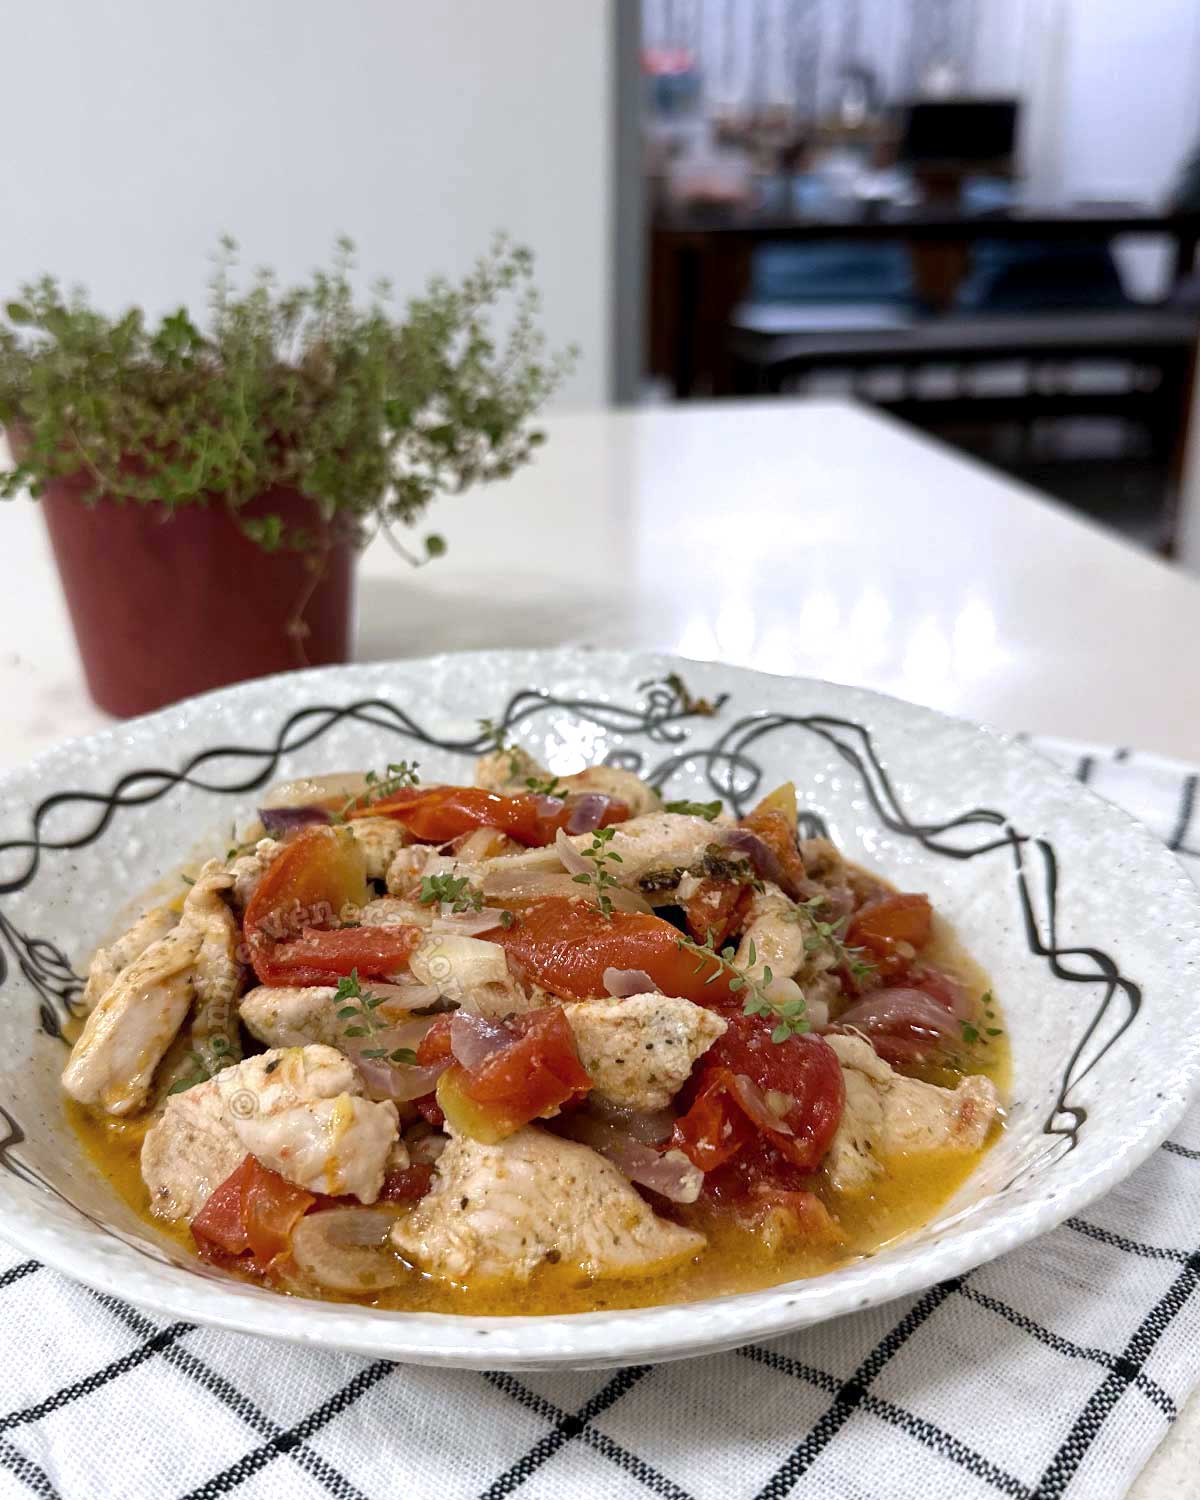 Chicken, tomatoes and thyme in olive oil, with pot of thyme in background